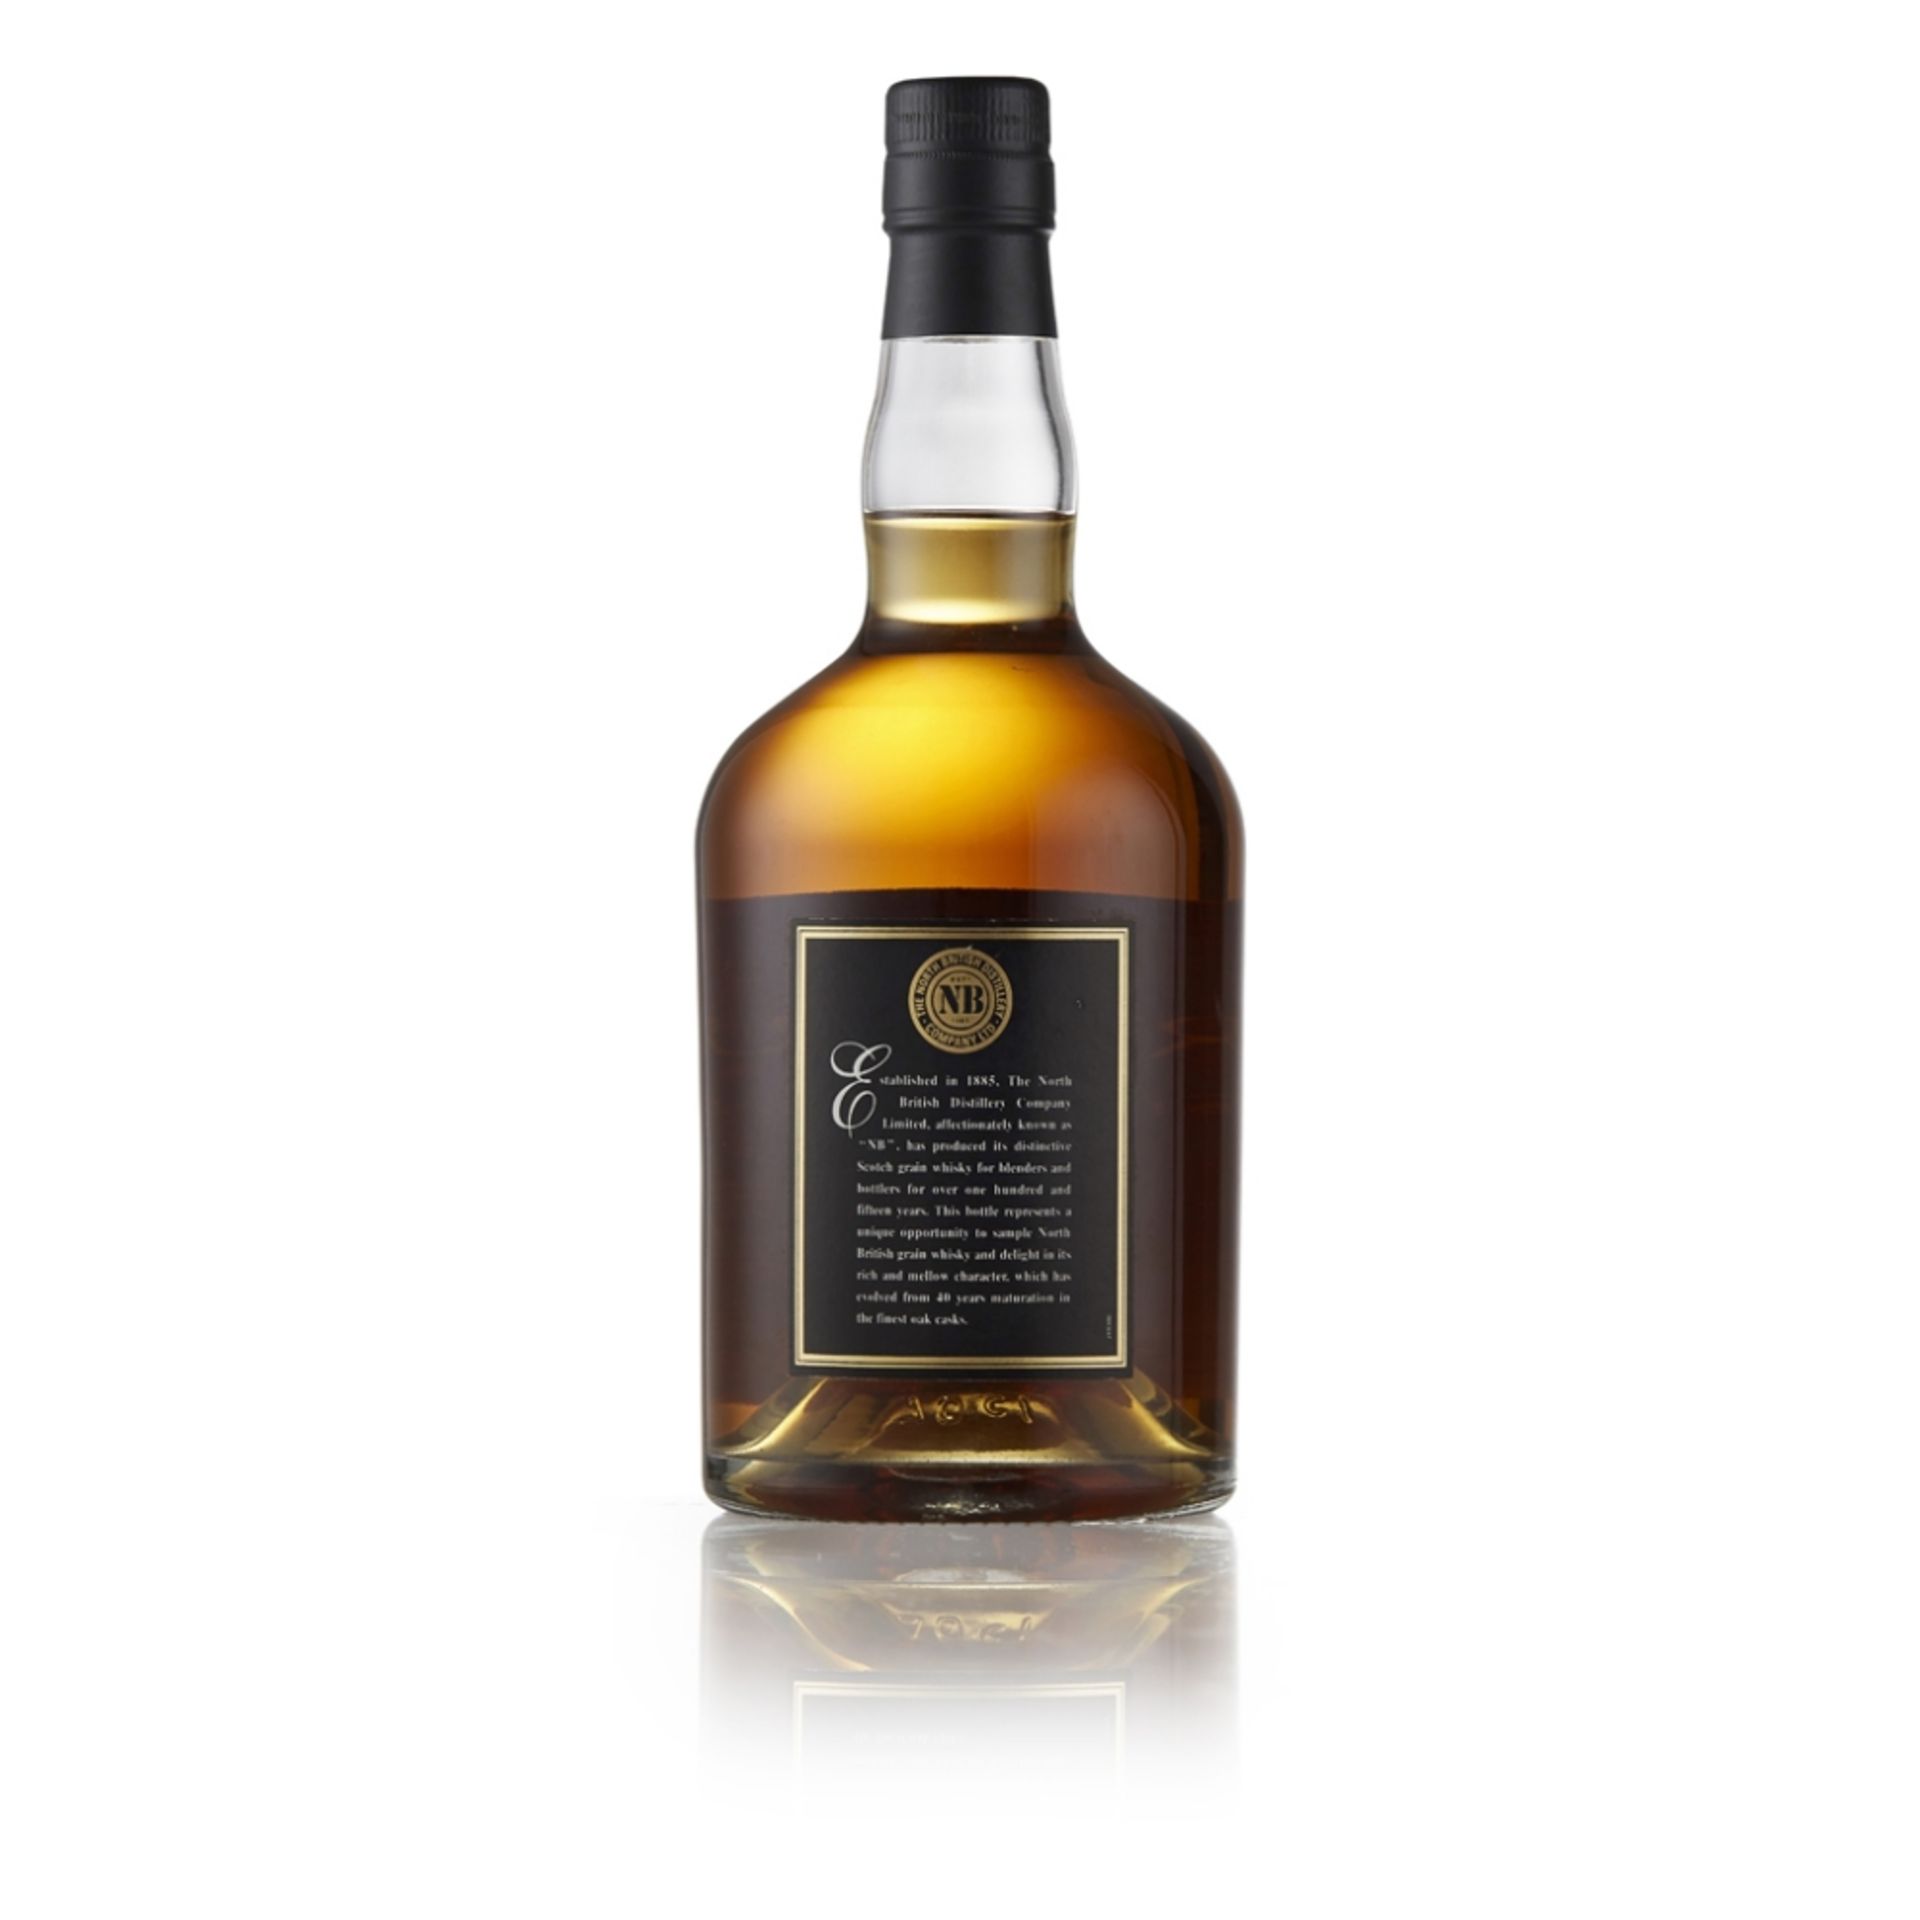 THE NORTH BRITISH 40 YEAR OLD SINGLE GRAIN bottled at cask strength 70cl/ 57.4% - Image 2 of 2